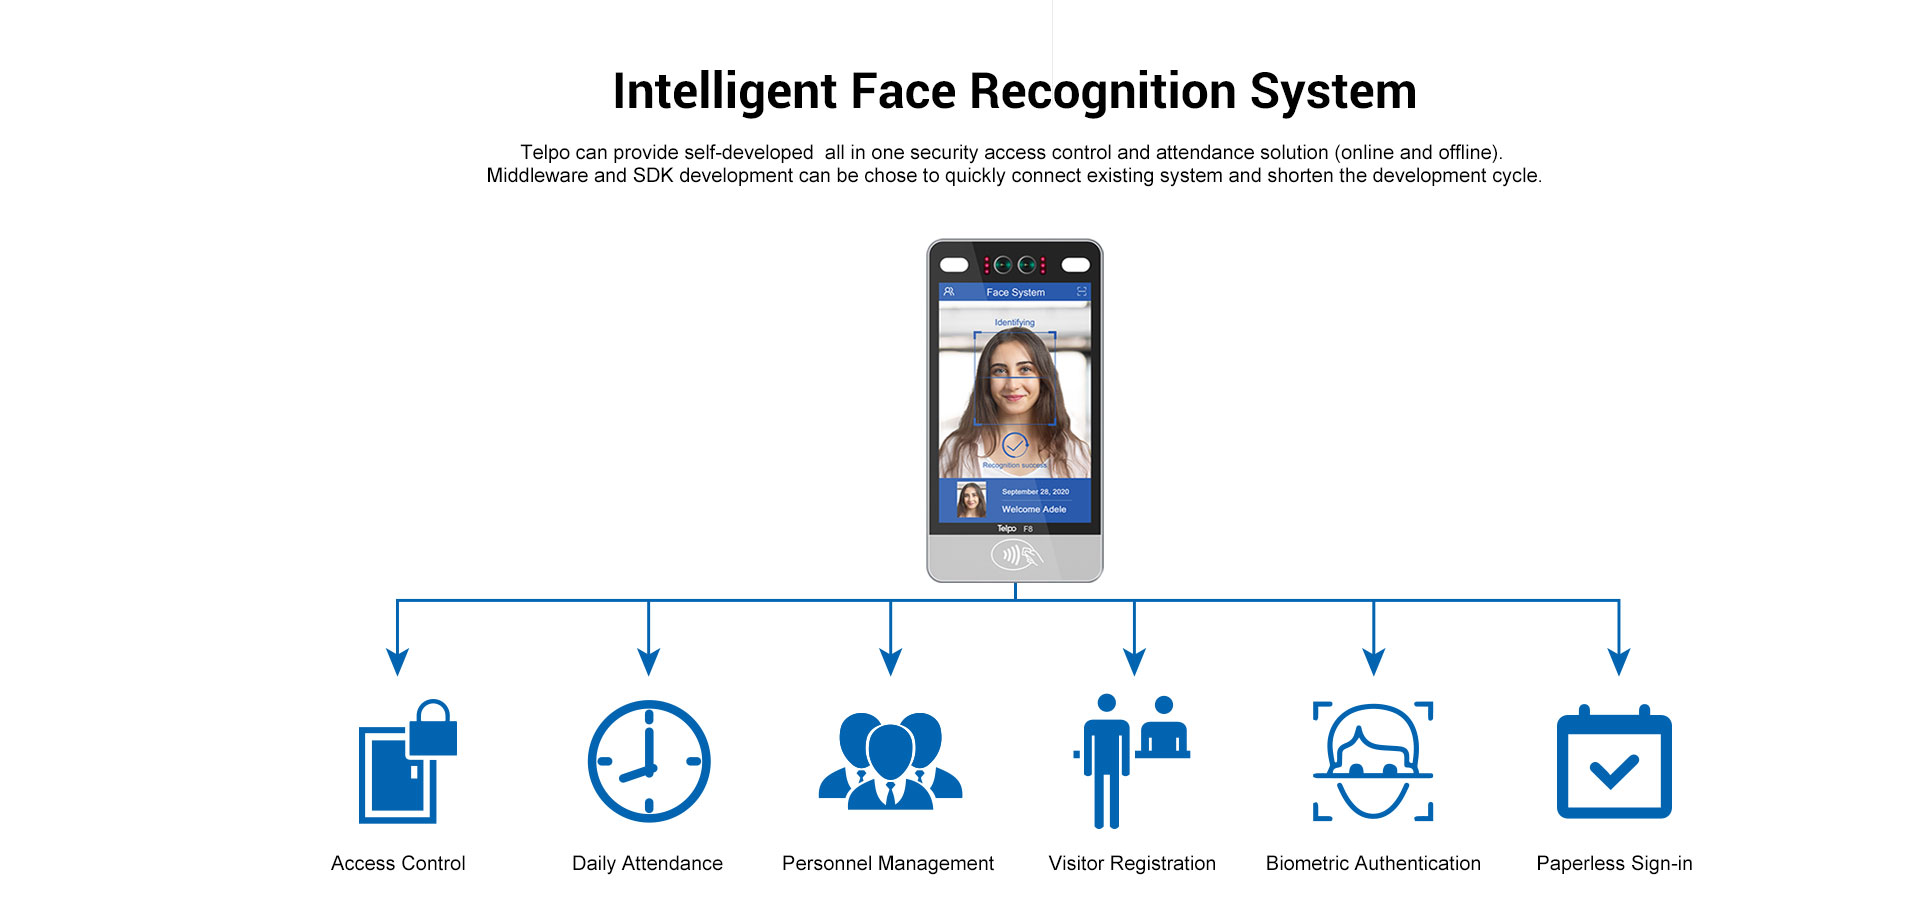 Intelligent facial access and attendance system F8 Telpo